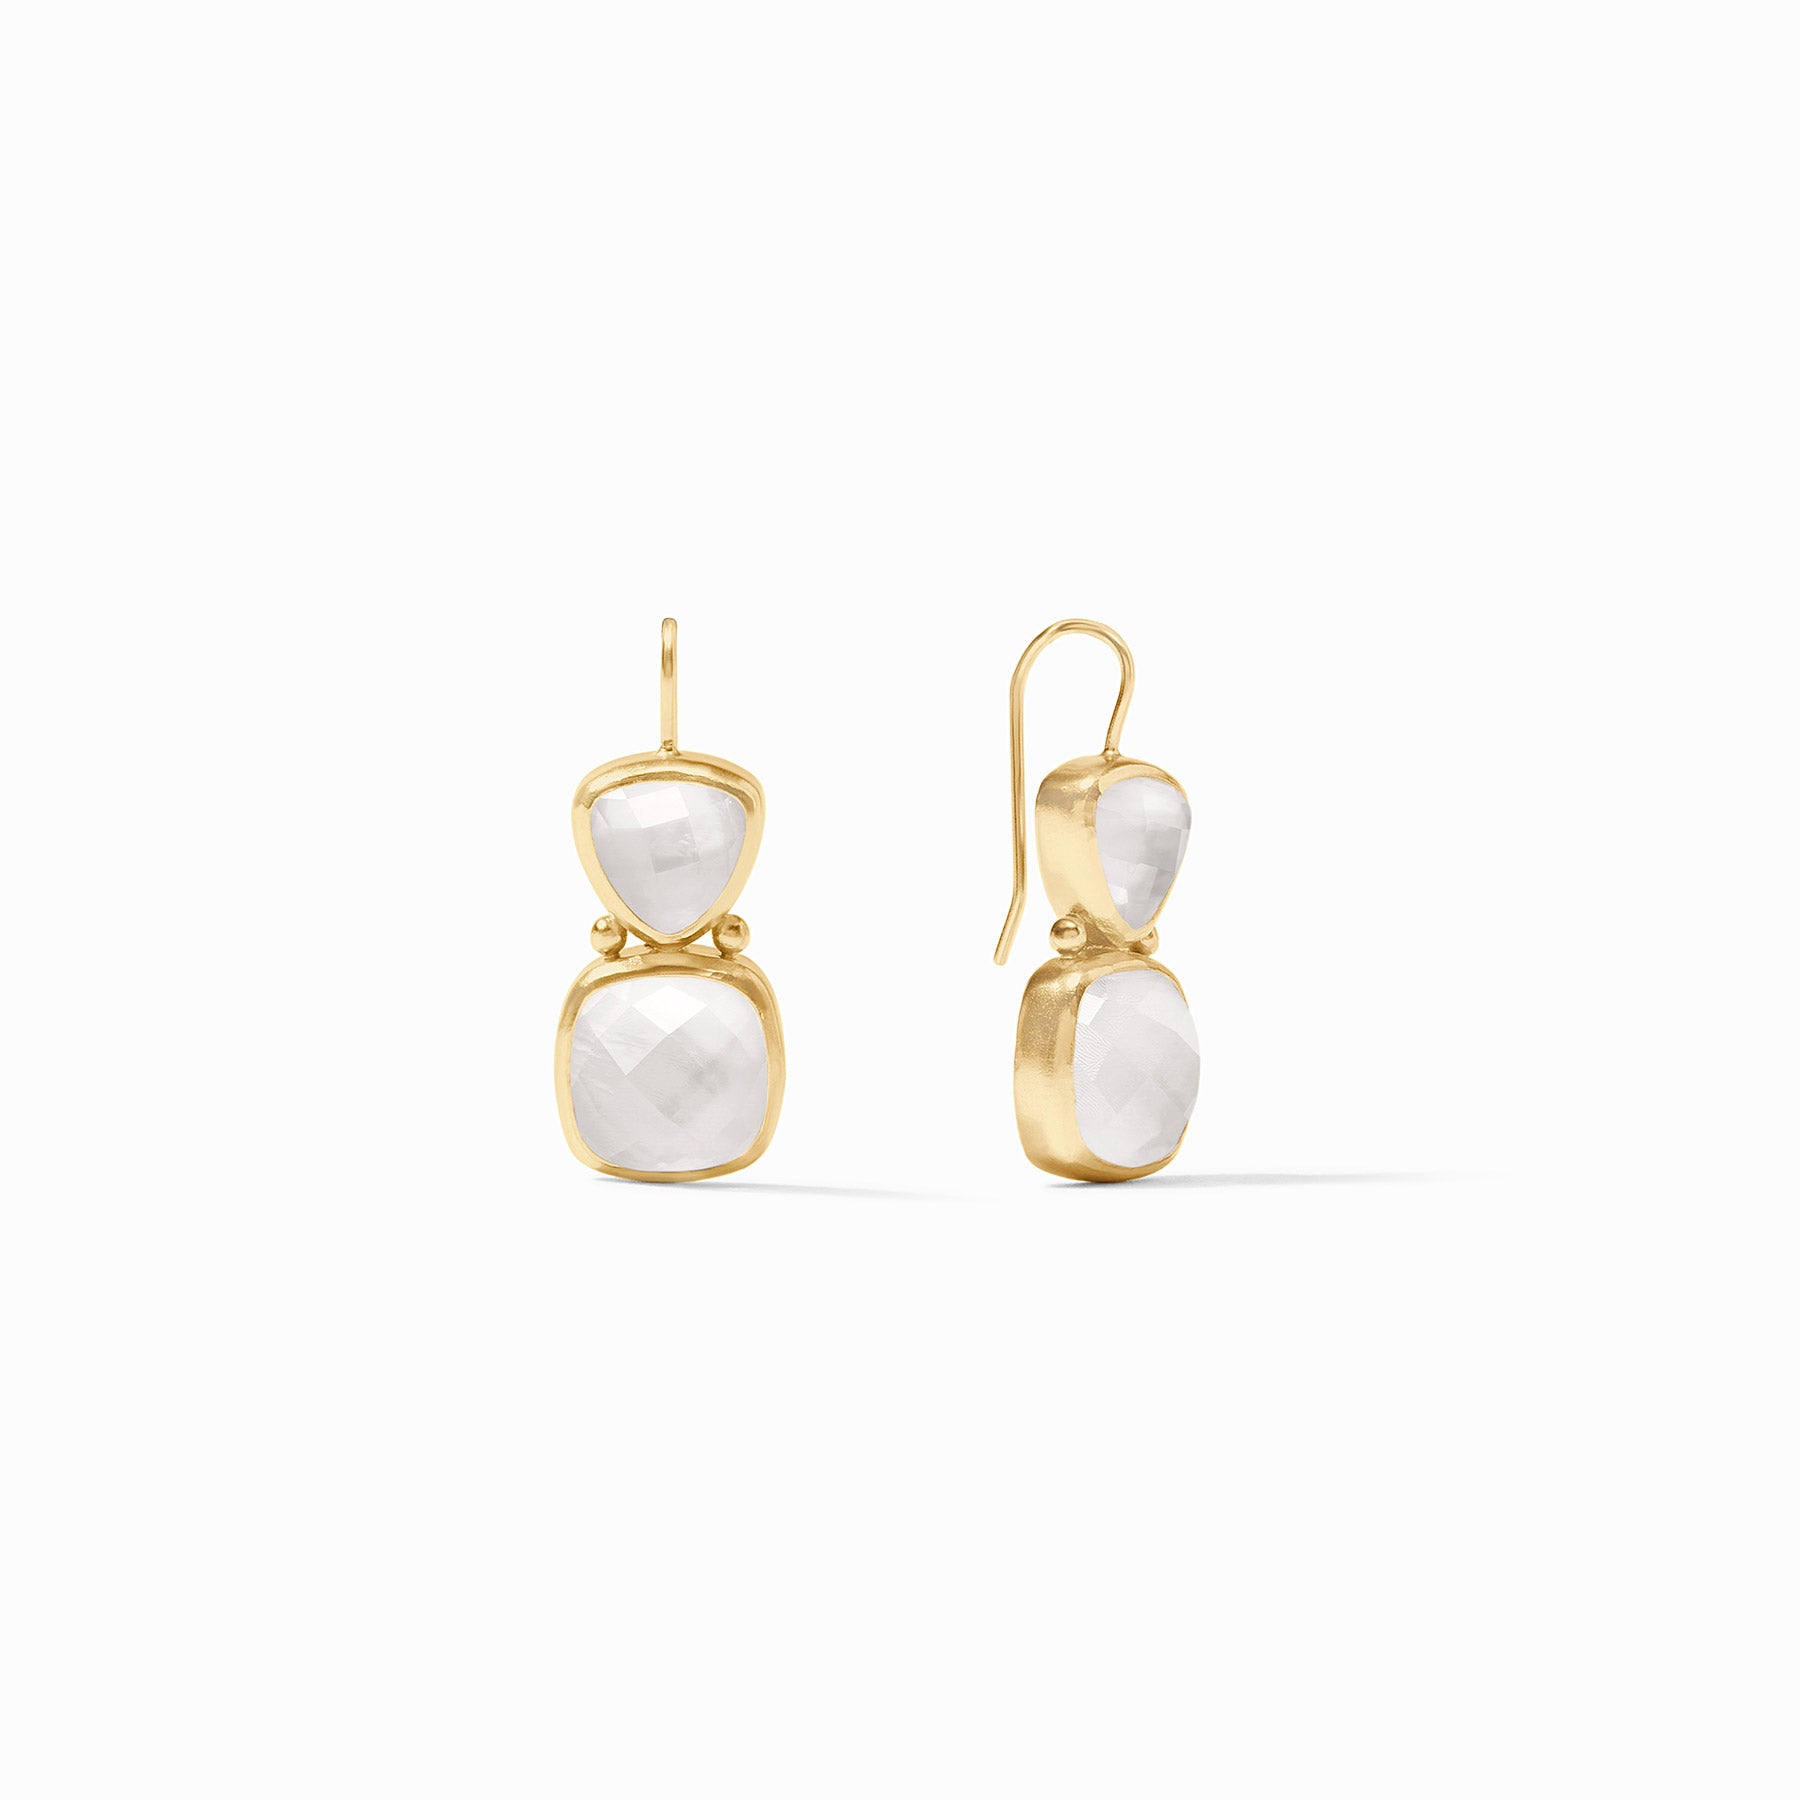 Julie Vos - Aquitaine Earring, Iridescent Clear Crystal